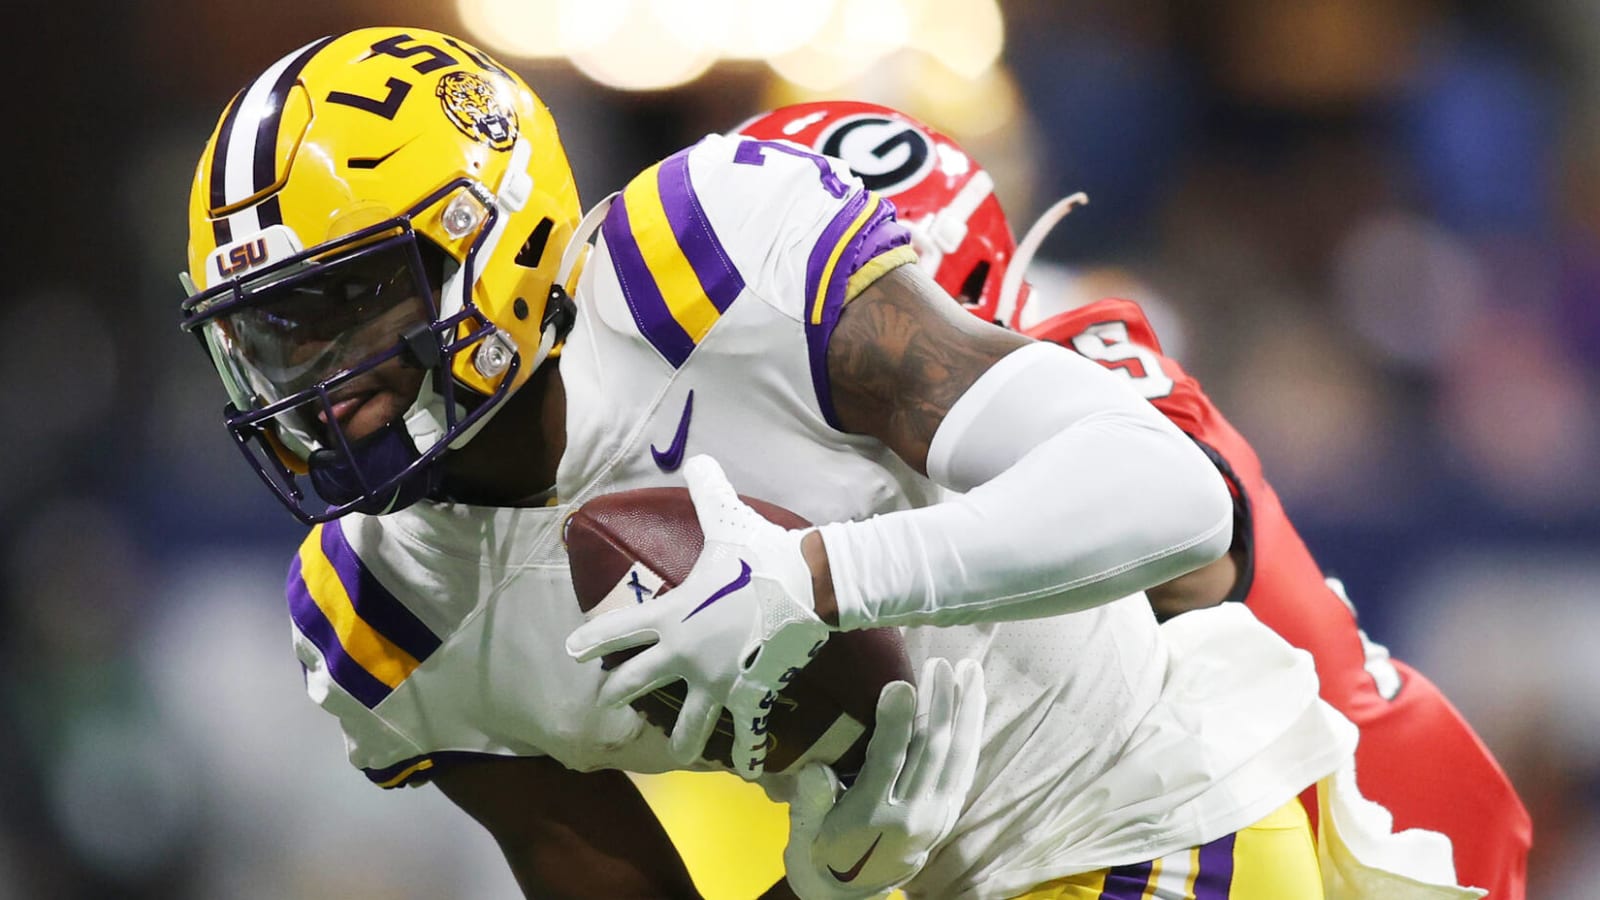 LSU's Kayshon Boutte makes right call in declaring for NFL draft